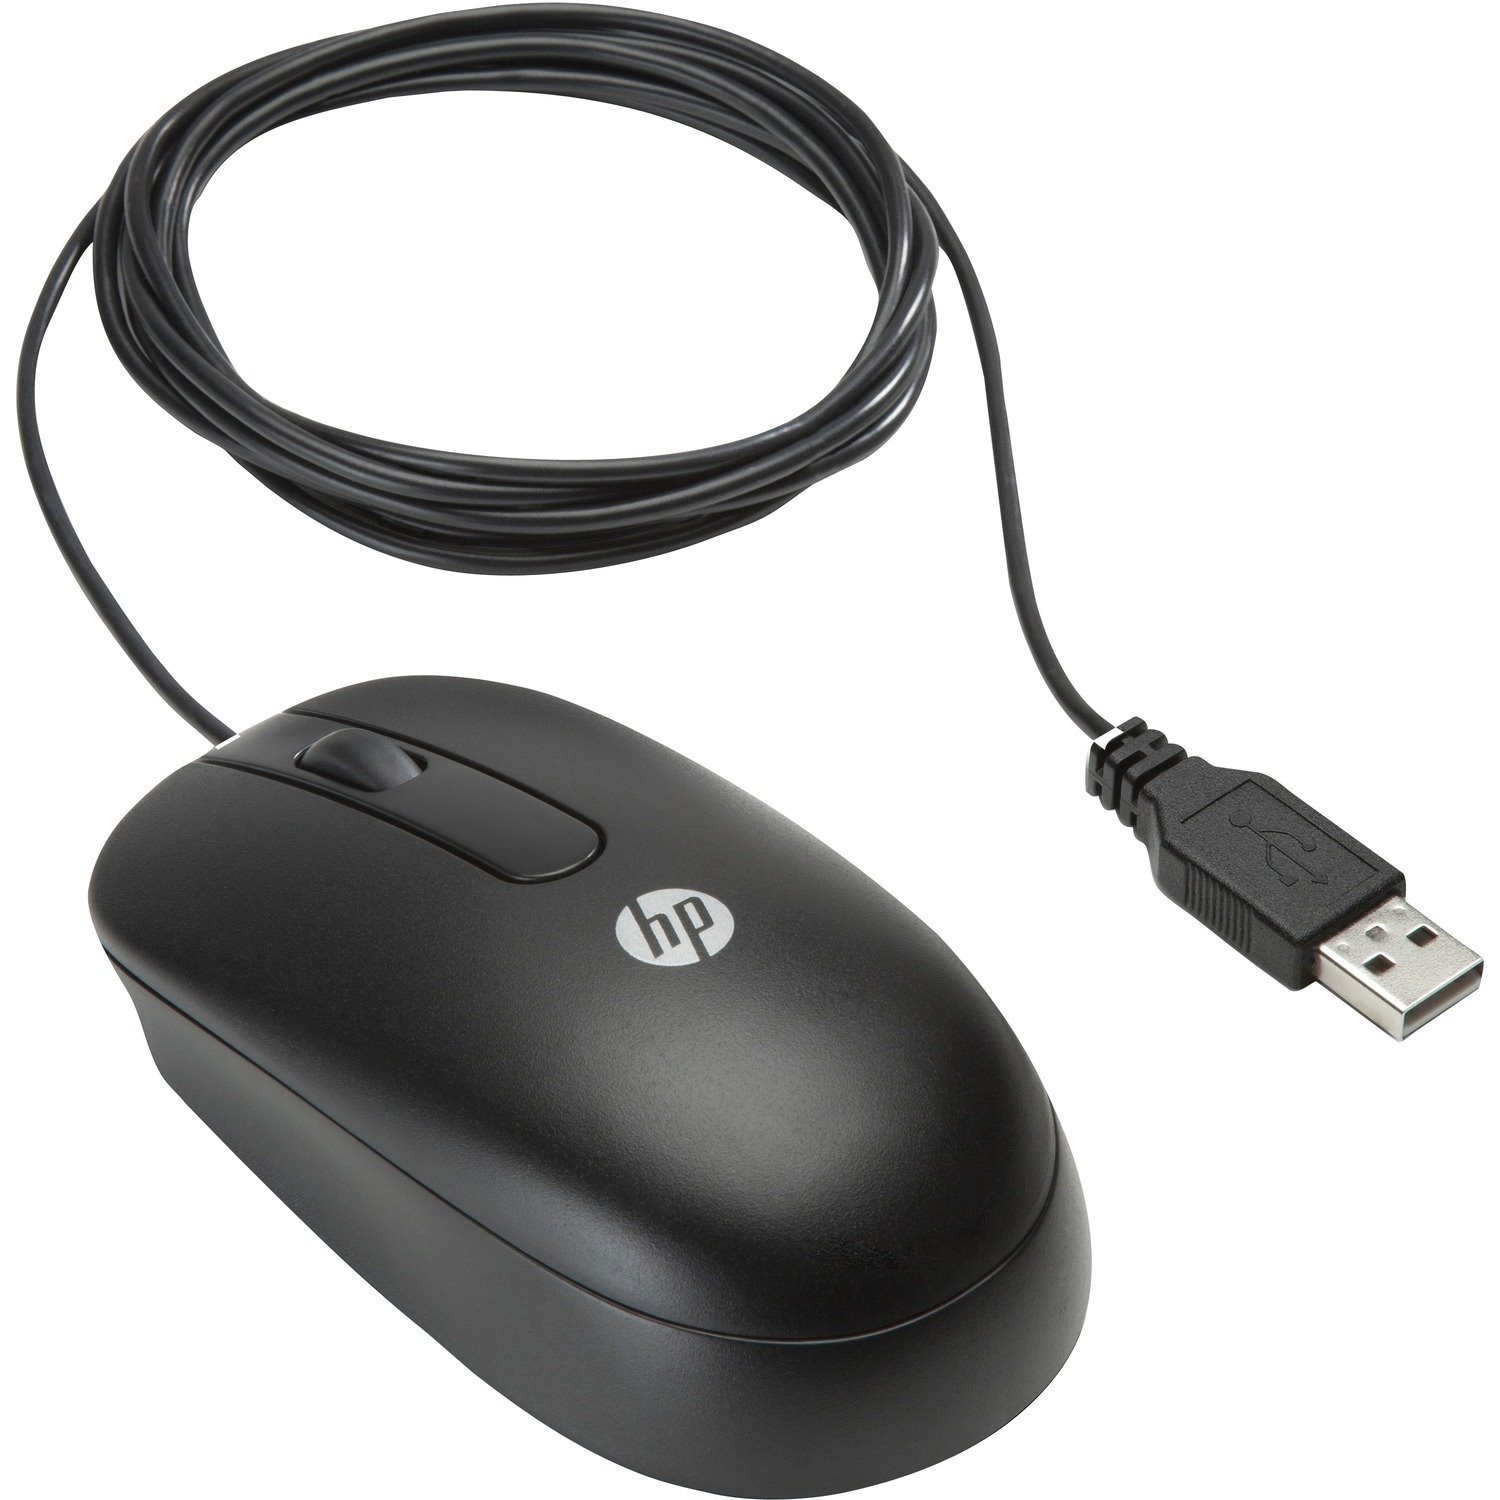 HP Mouse - USB - Laser - 3 Button(s) - Black - 1 Pack